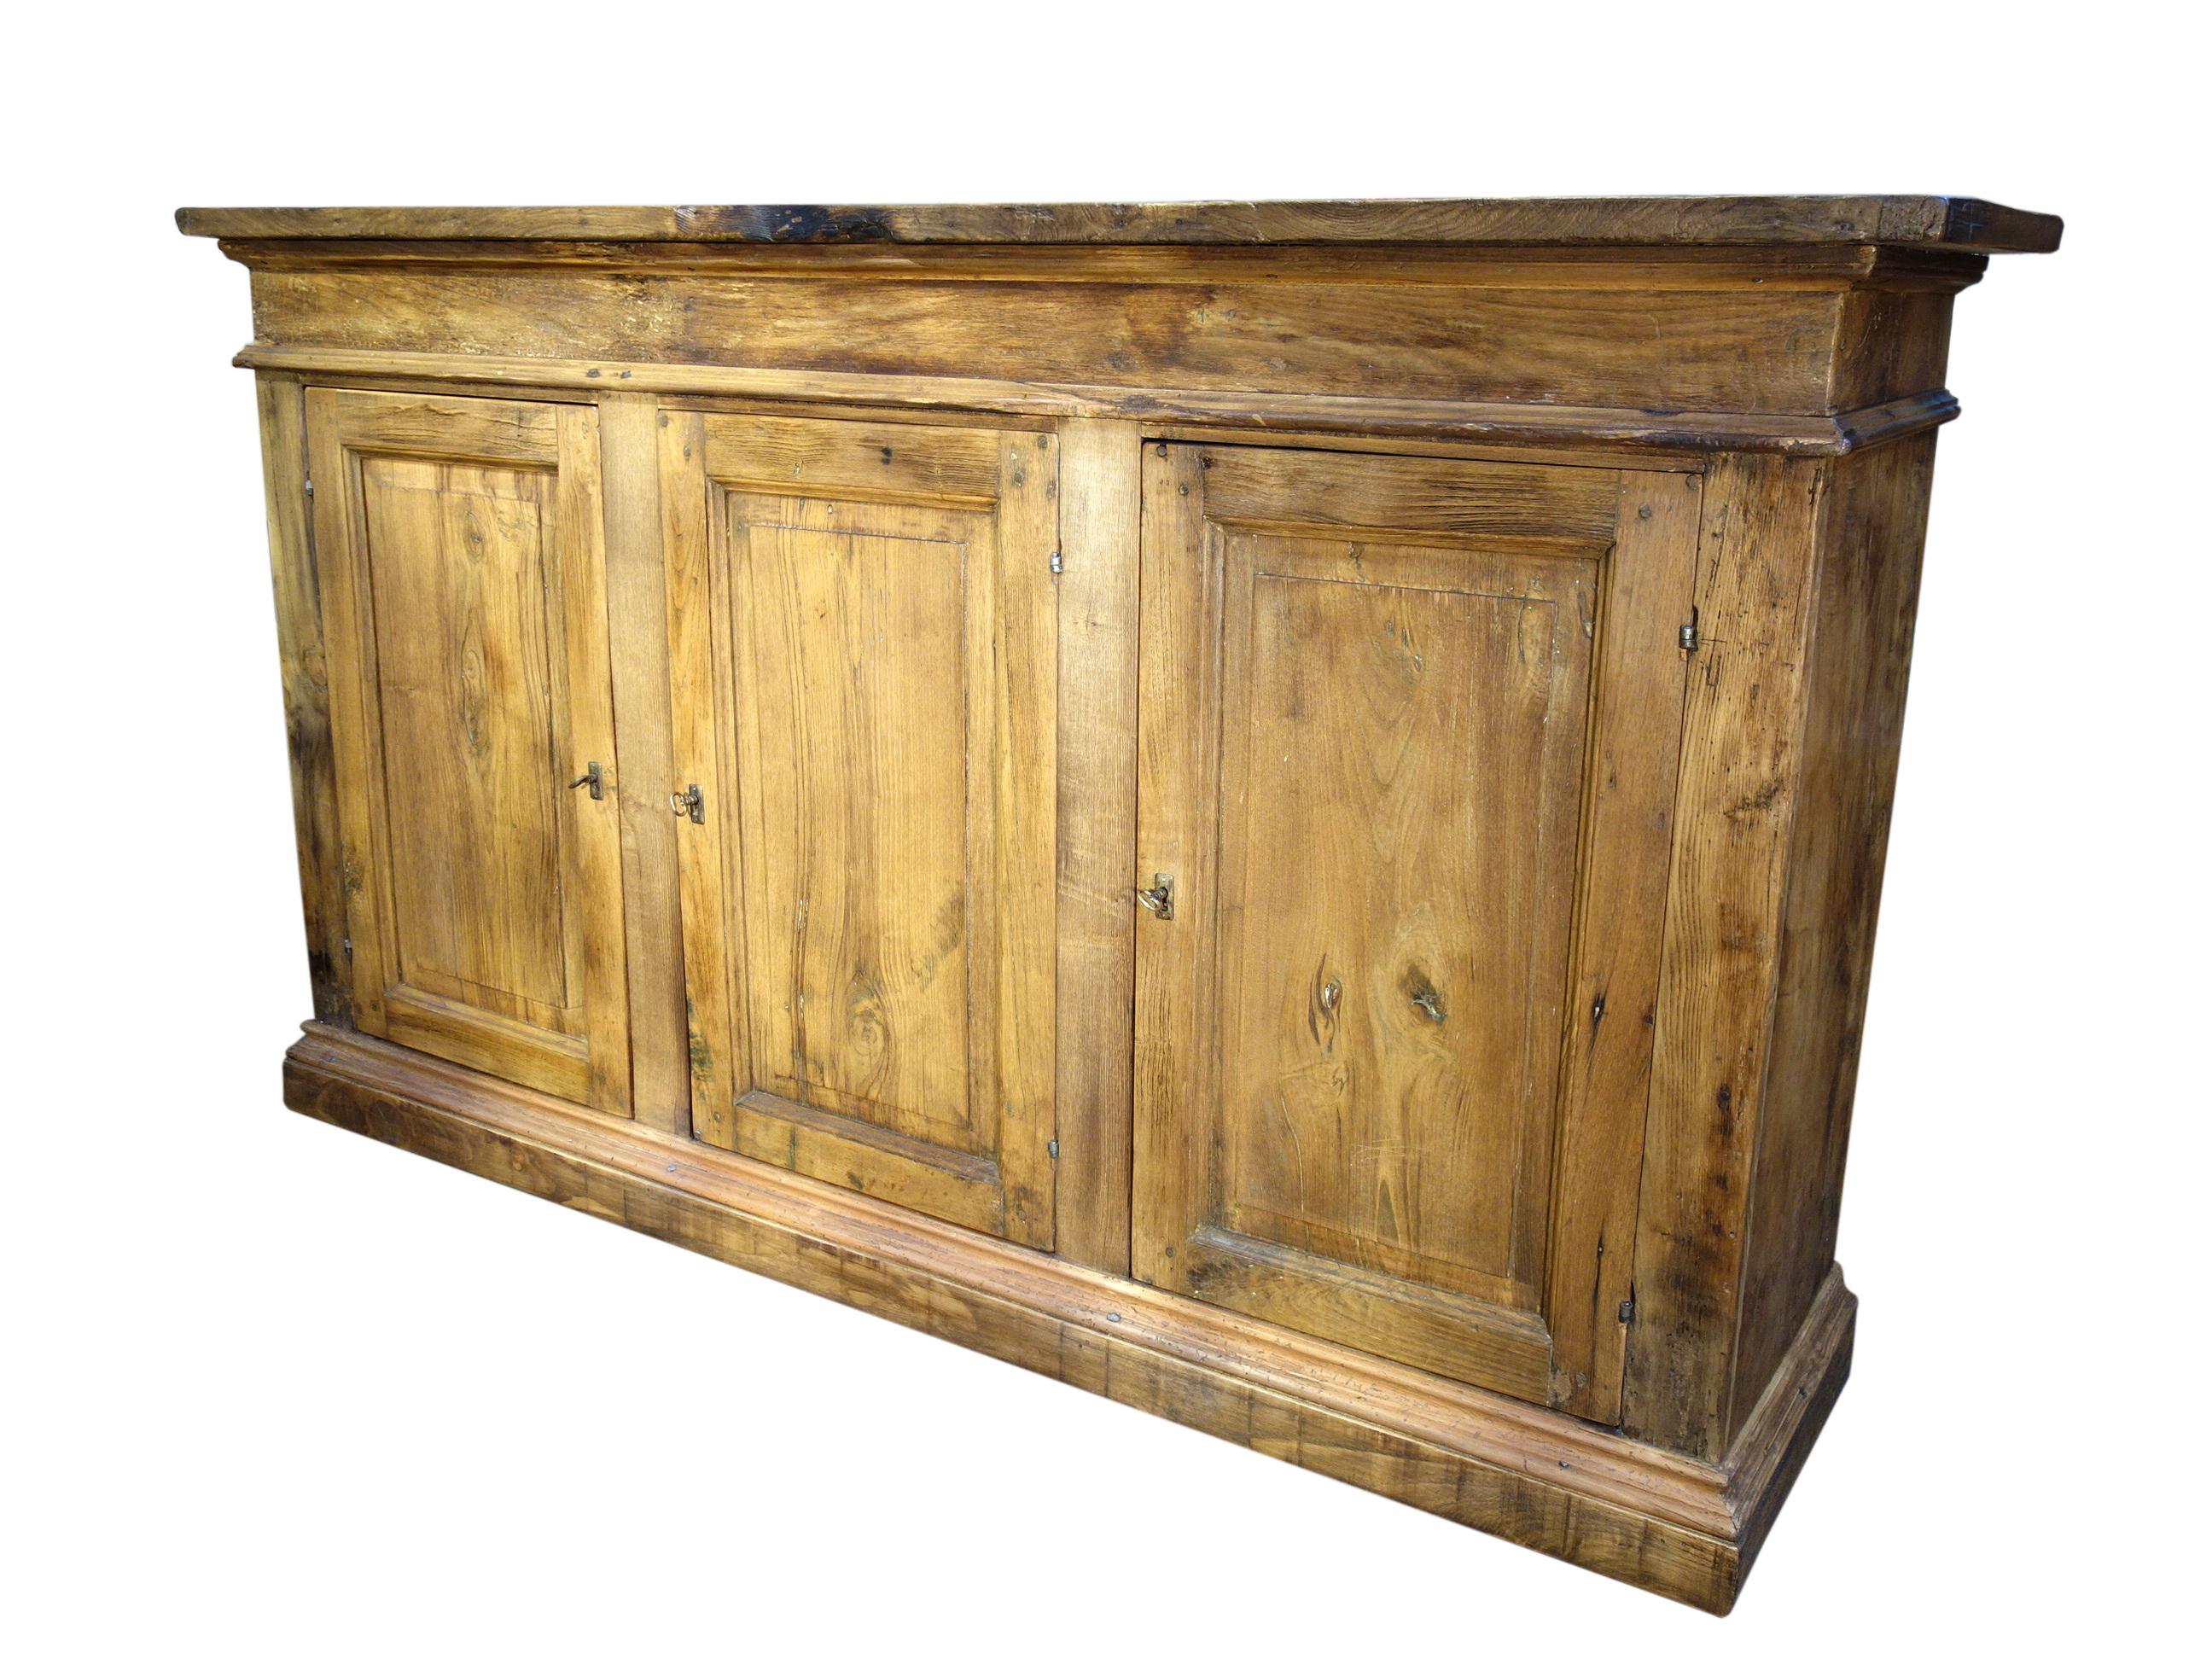 “Benevento” 3-door Mediterranean Old Chestnut Credenza, with 3 interior shelves:

Our stately & rustic style handcrafted credenza features Old Chestnut hardwoods, finely aged with distressed unstained patina and forged hardware. This “Benevento”